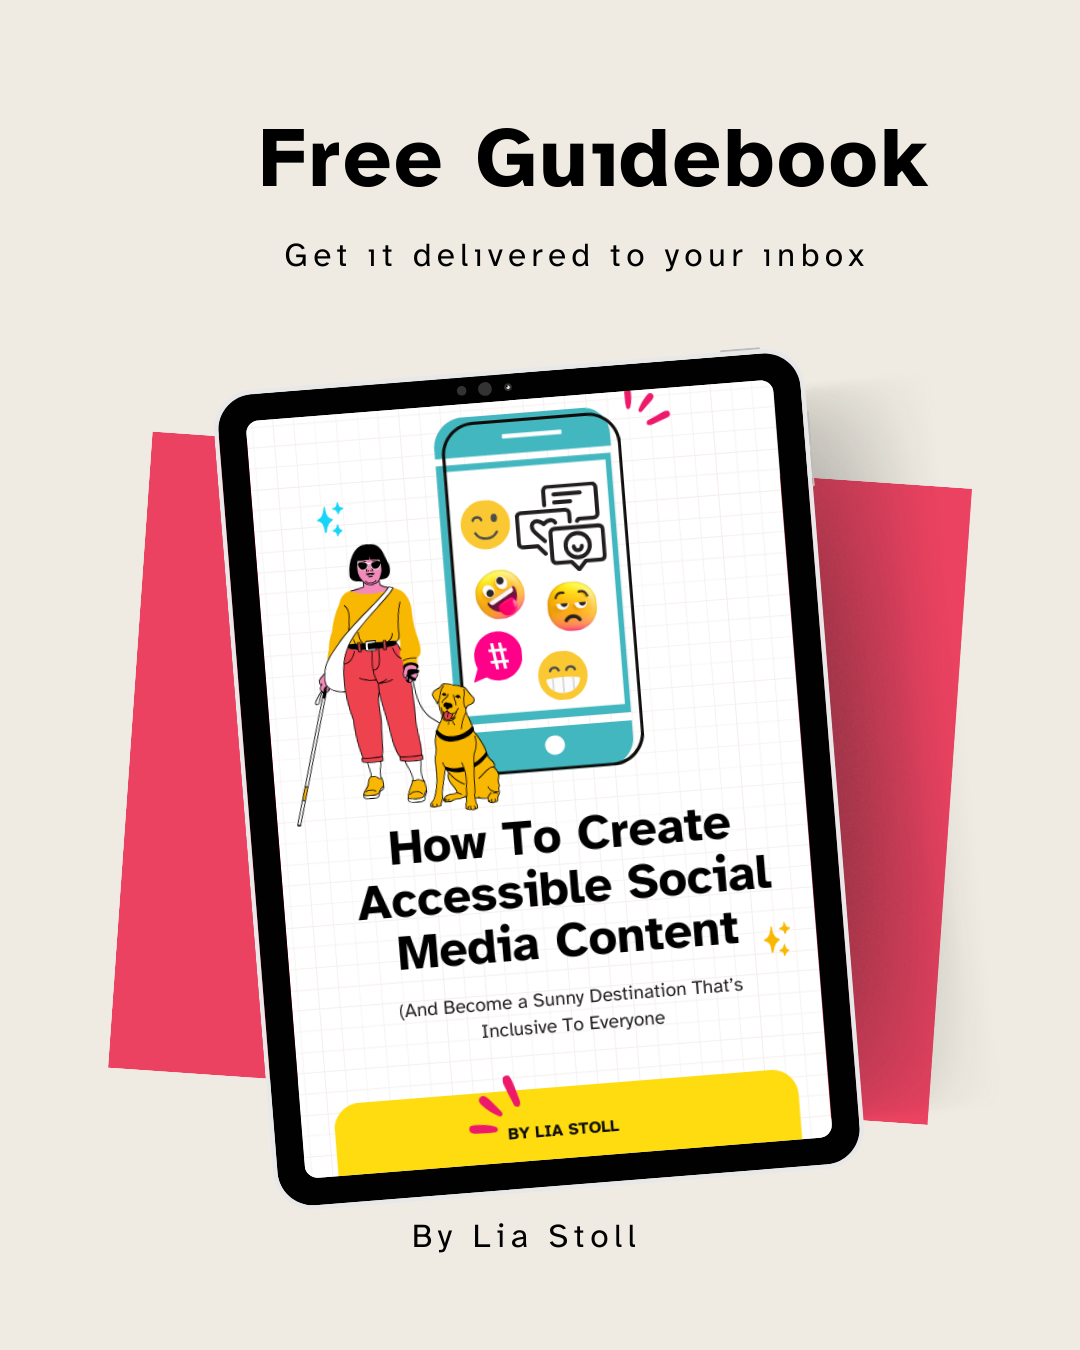 Free guide book cover on a mobile screen, "How To Create Accessible Social Media Content". Your trustworthy guide to creating a sunny destination that's inclusive for everyone. A cartoon figure of a blind woman wearing a mustard shirt and salmon-colored pants, holding a cane, and her guide dog sitting next to her. A mobile phone with emojis, messages and a hashtag in a pink speech bubble.